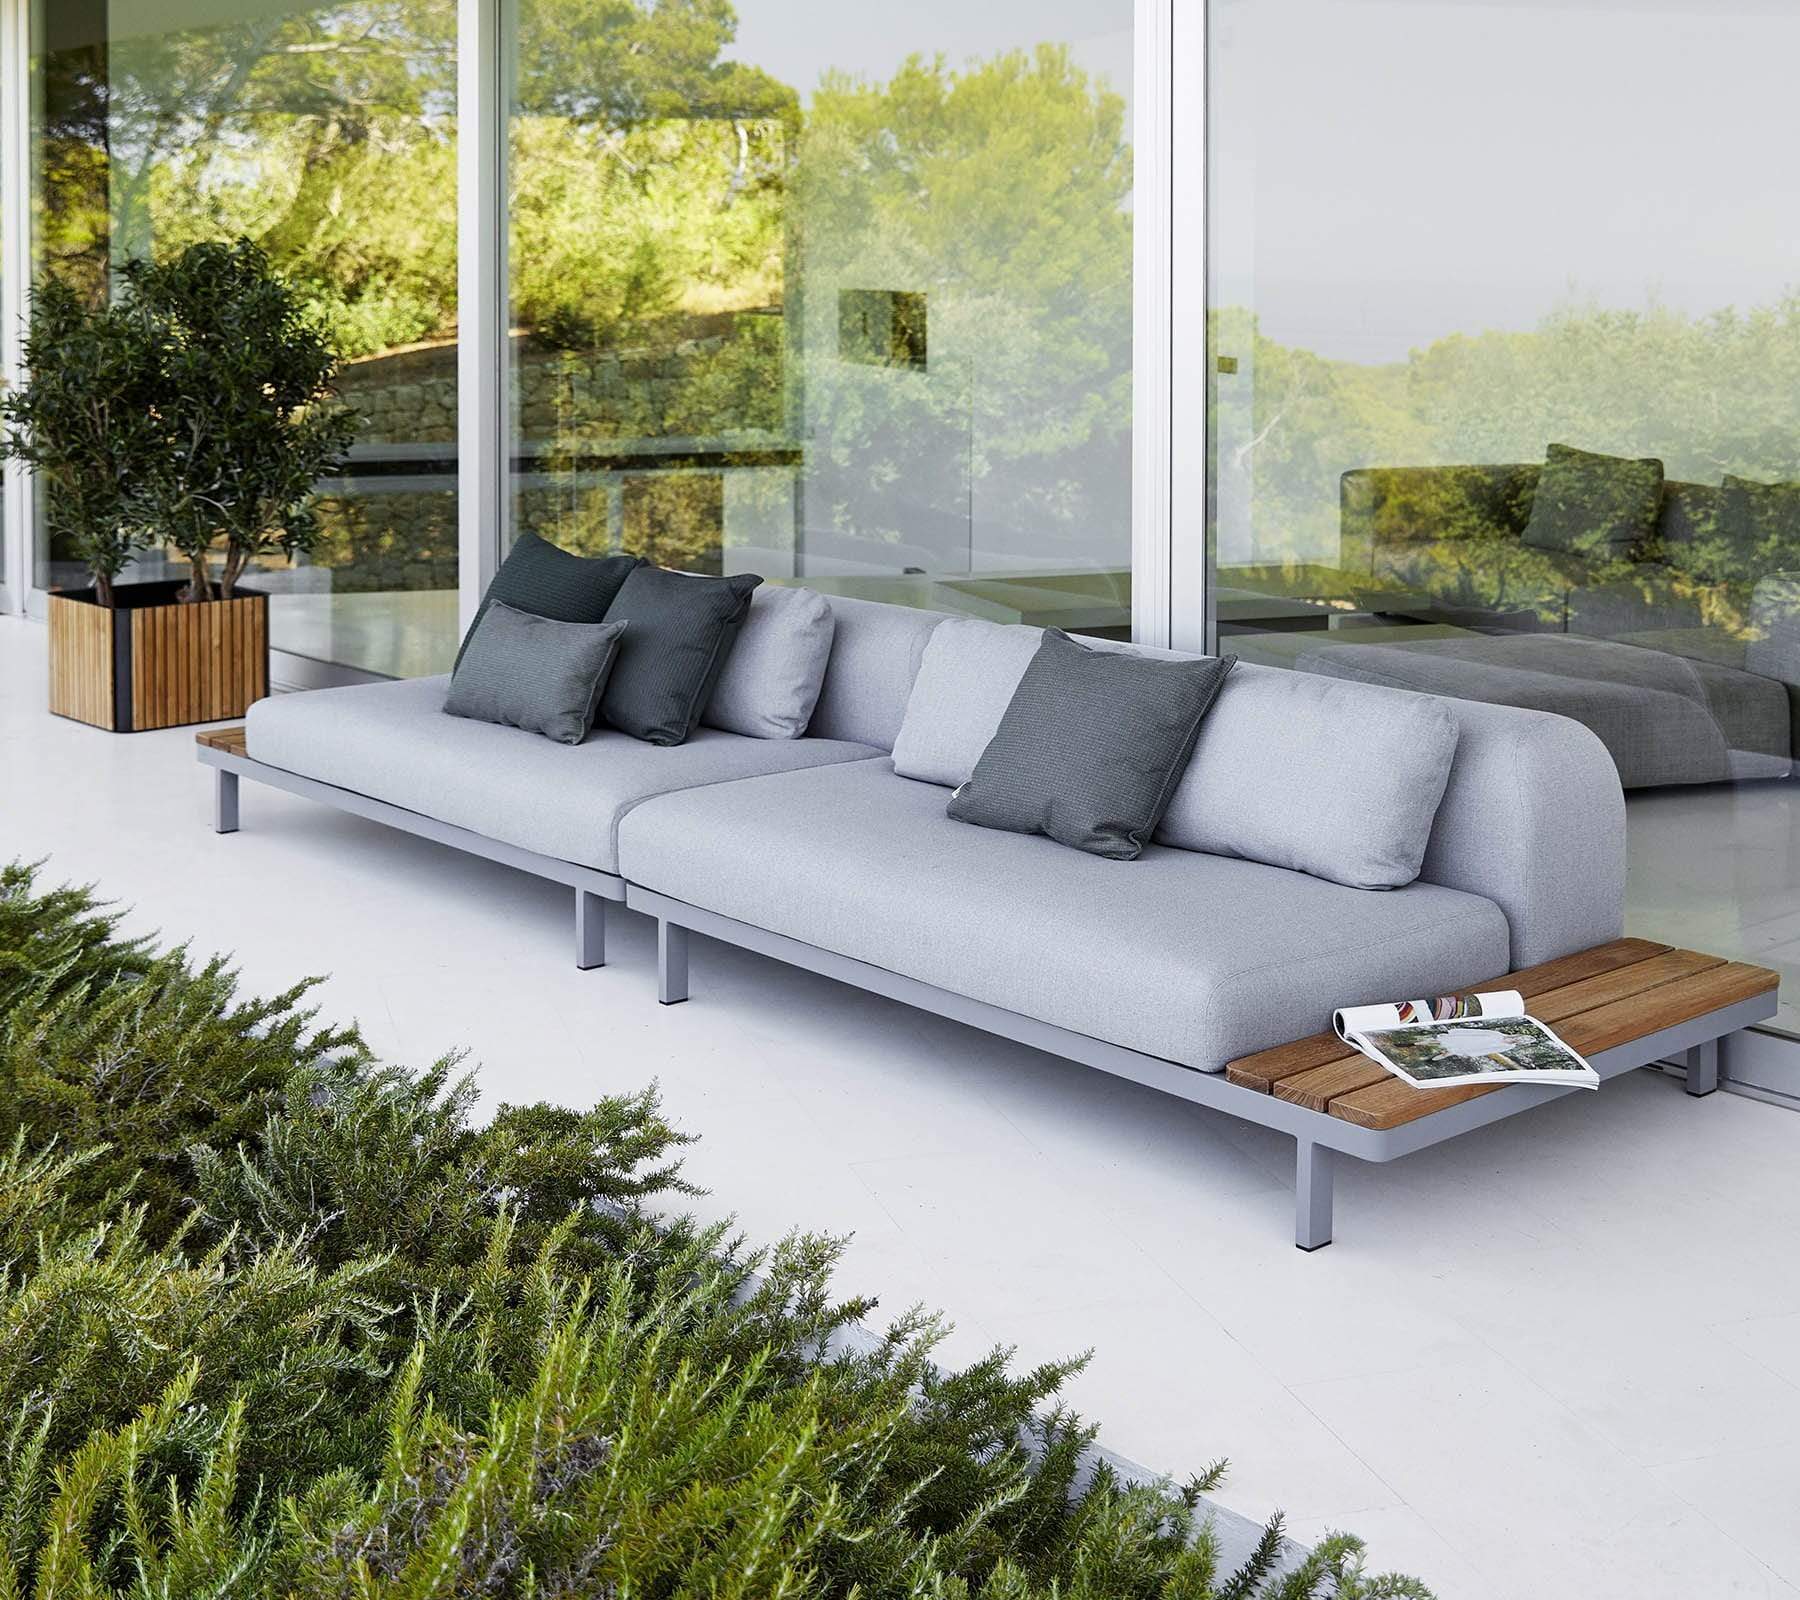 Boxhill's Space light grey outdoor sectional sofa with teak side table top set against glass wall with teak planter box at the side